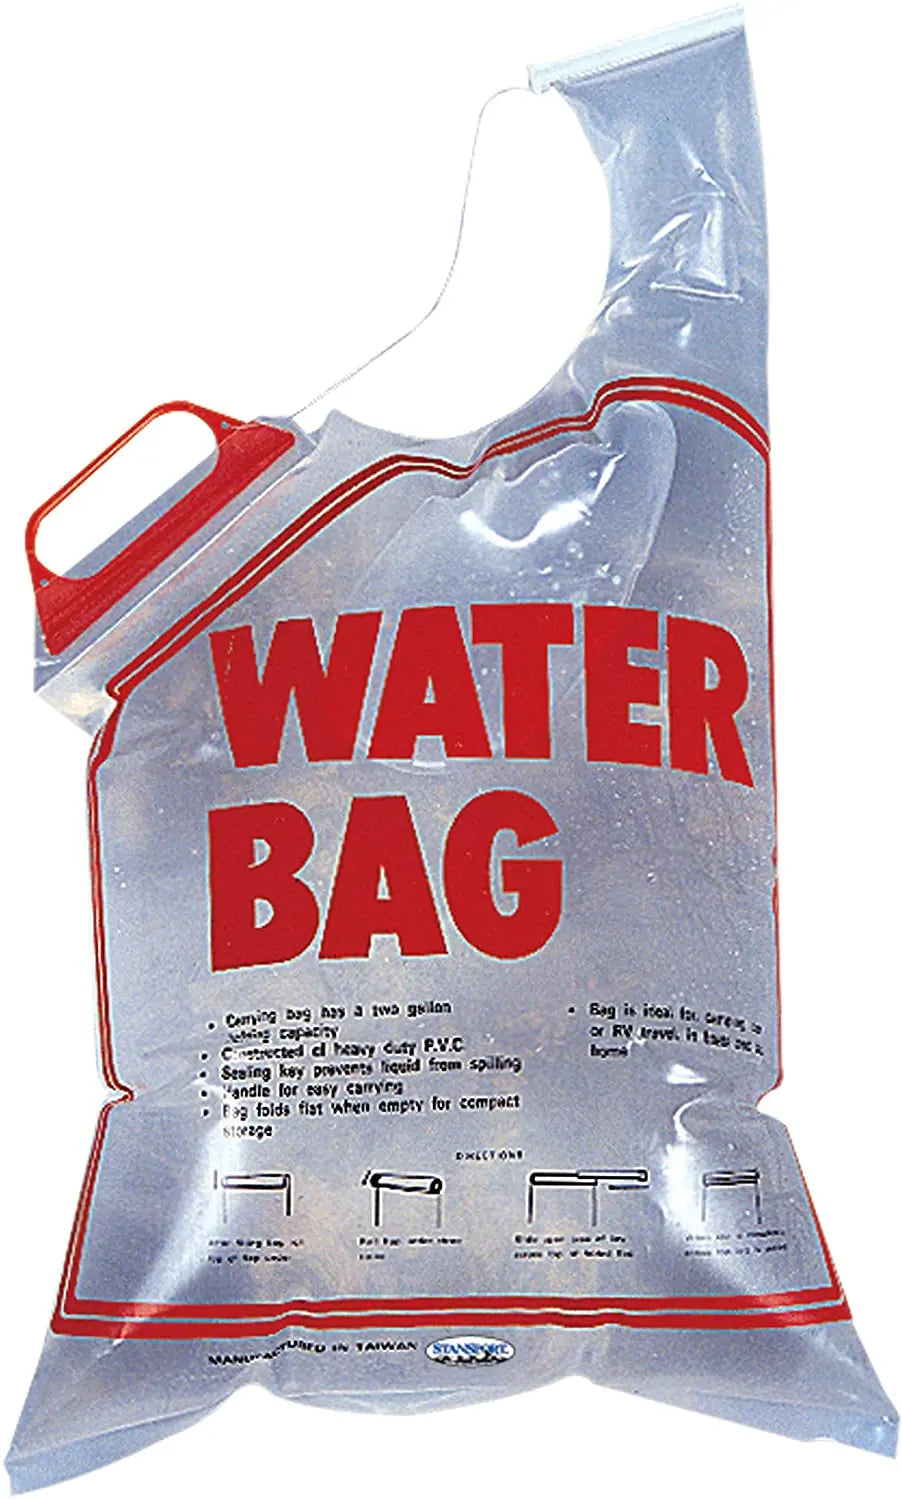 2 Gallon Water Bag - First Aid Market